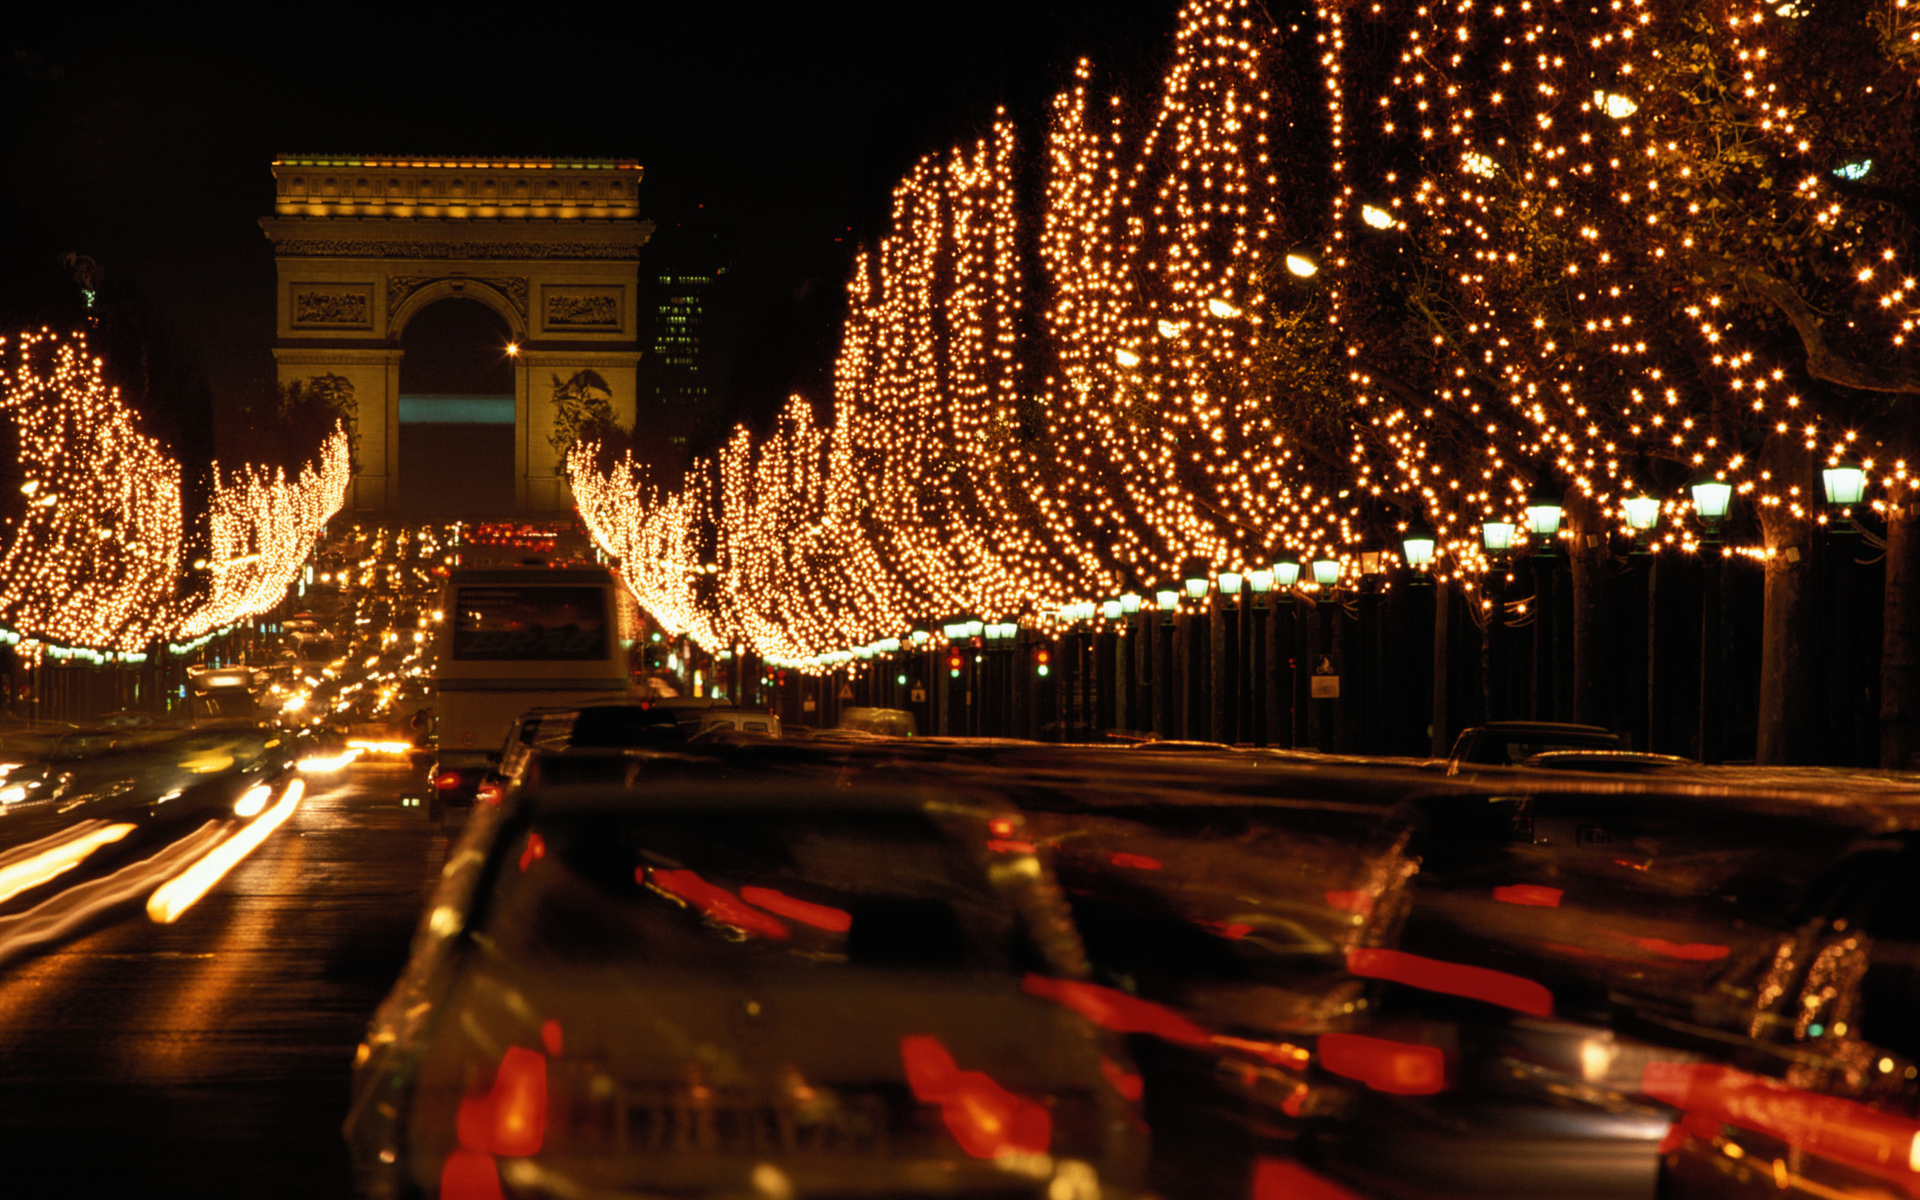 new, Yearand039s, Eve, 2013, In, Paris, France, Arc, De, Triomphe, Avenue, Des, Champs elysees, Traffic, Roads, Timelapse, Lapse, Vehicles, Cars, Monument, Trees, Light, Night, Architecture, World, Buildings Wallpaper